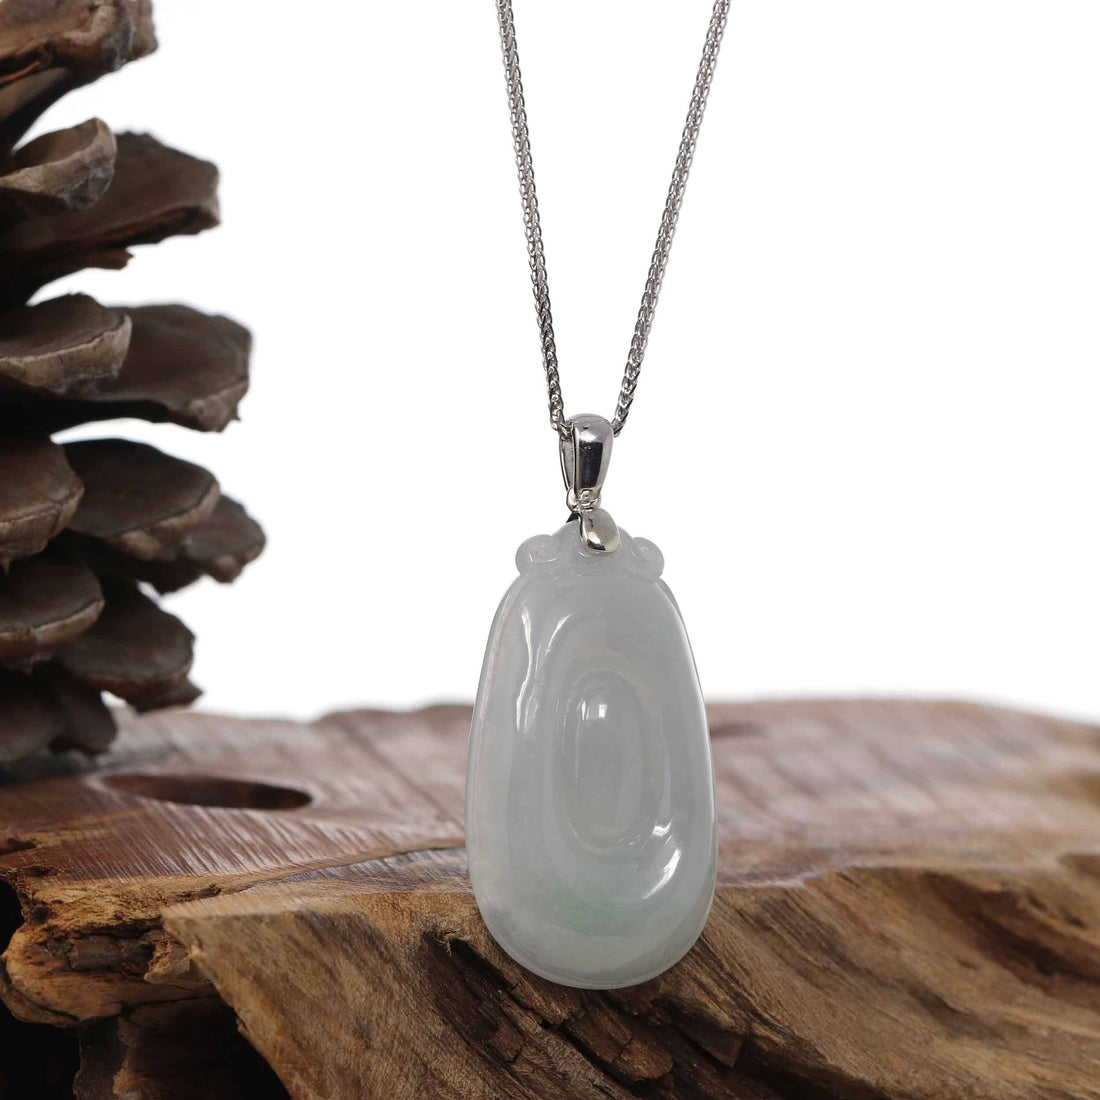 Baikalla Jewelry Jade Guanyin Pendant Necklace Copy of Natural Light Green Jadeite Jade Fu Bei Pendant Necklace With Sterling Silver Bail